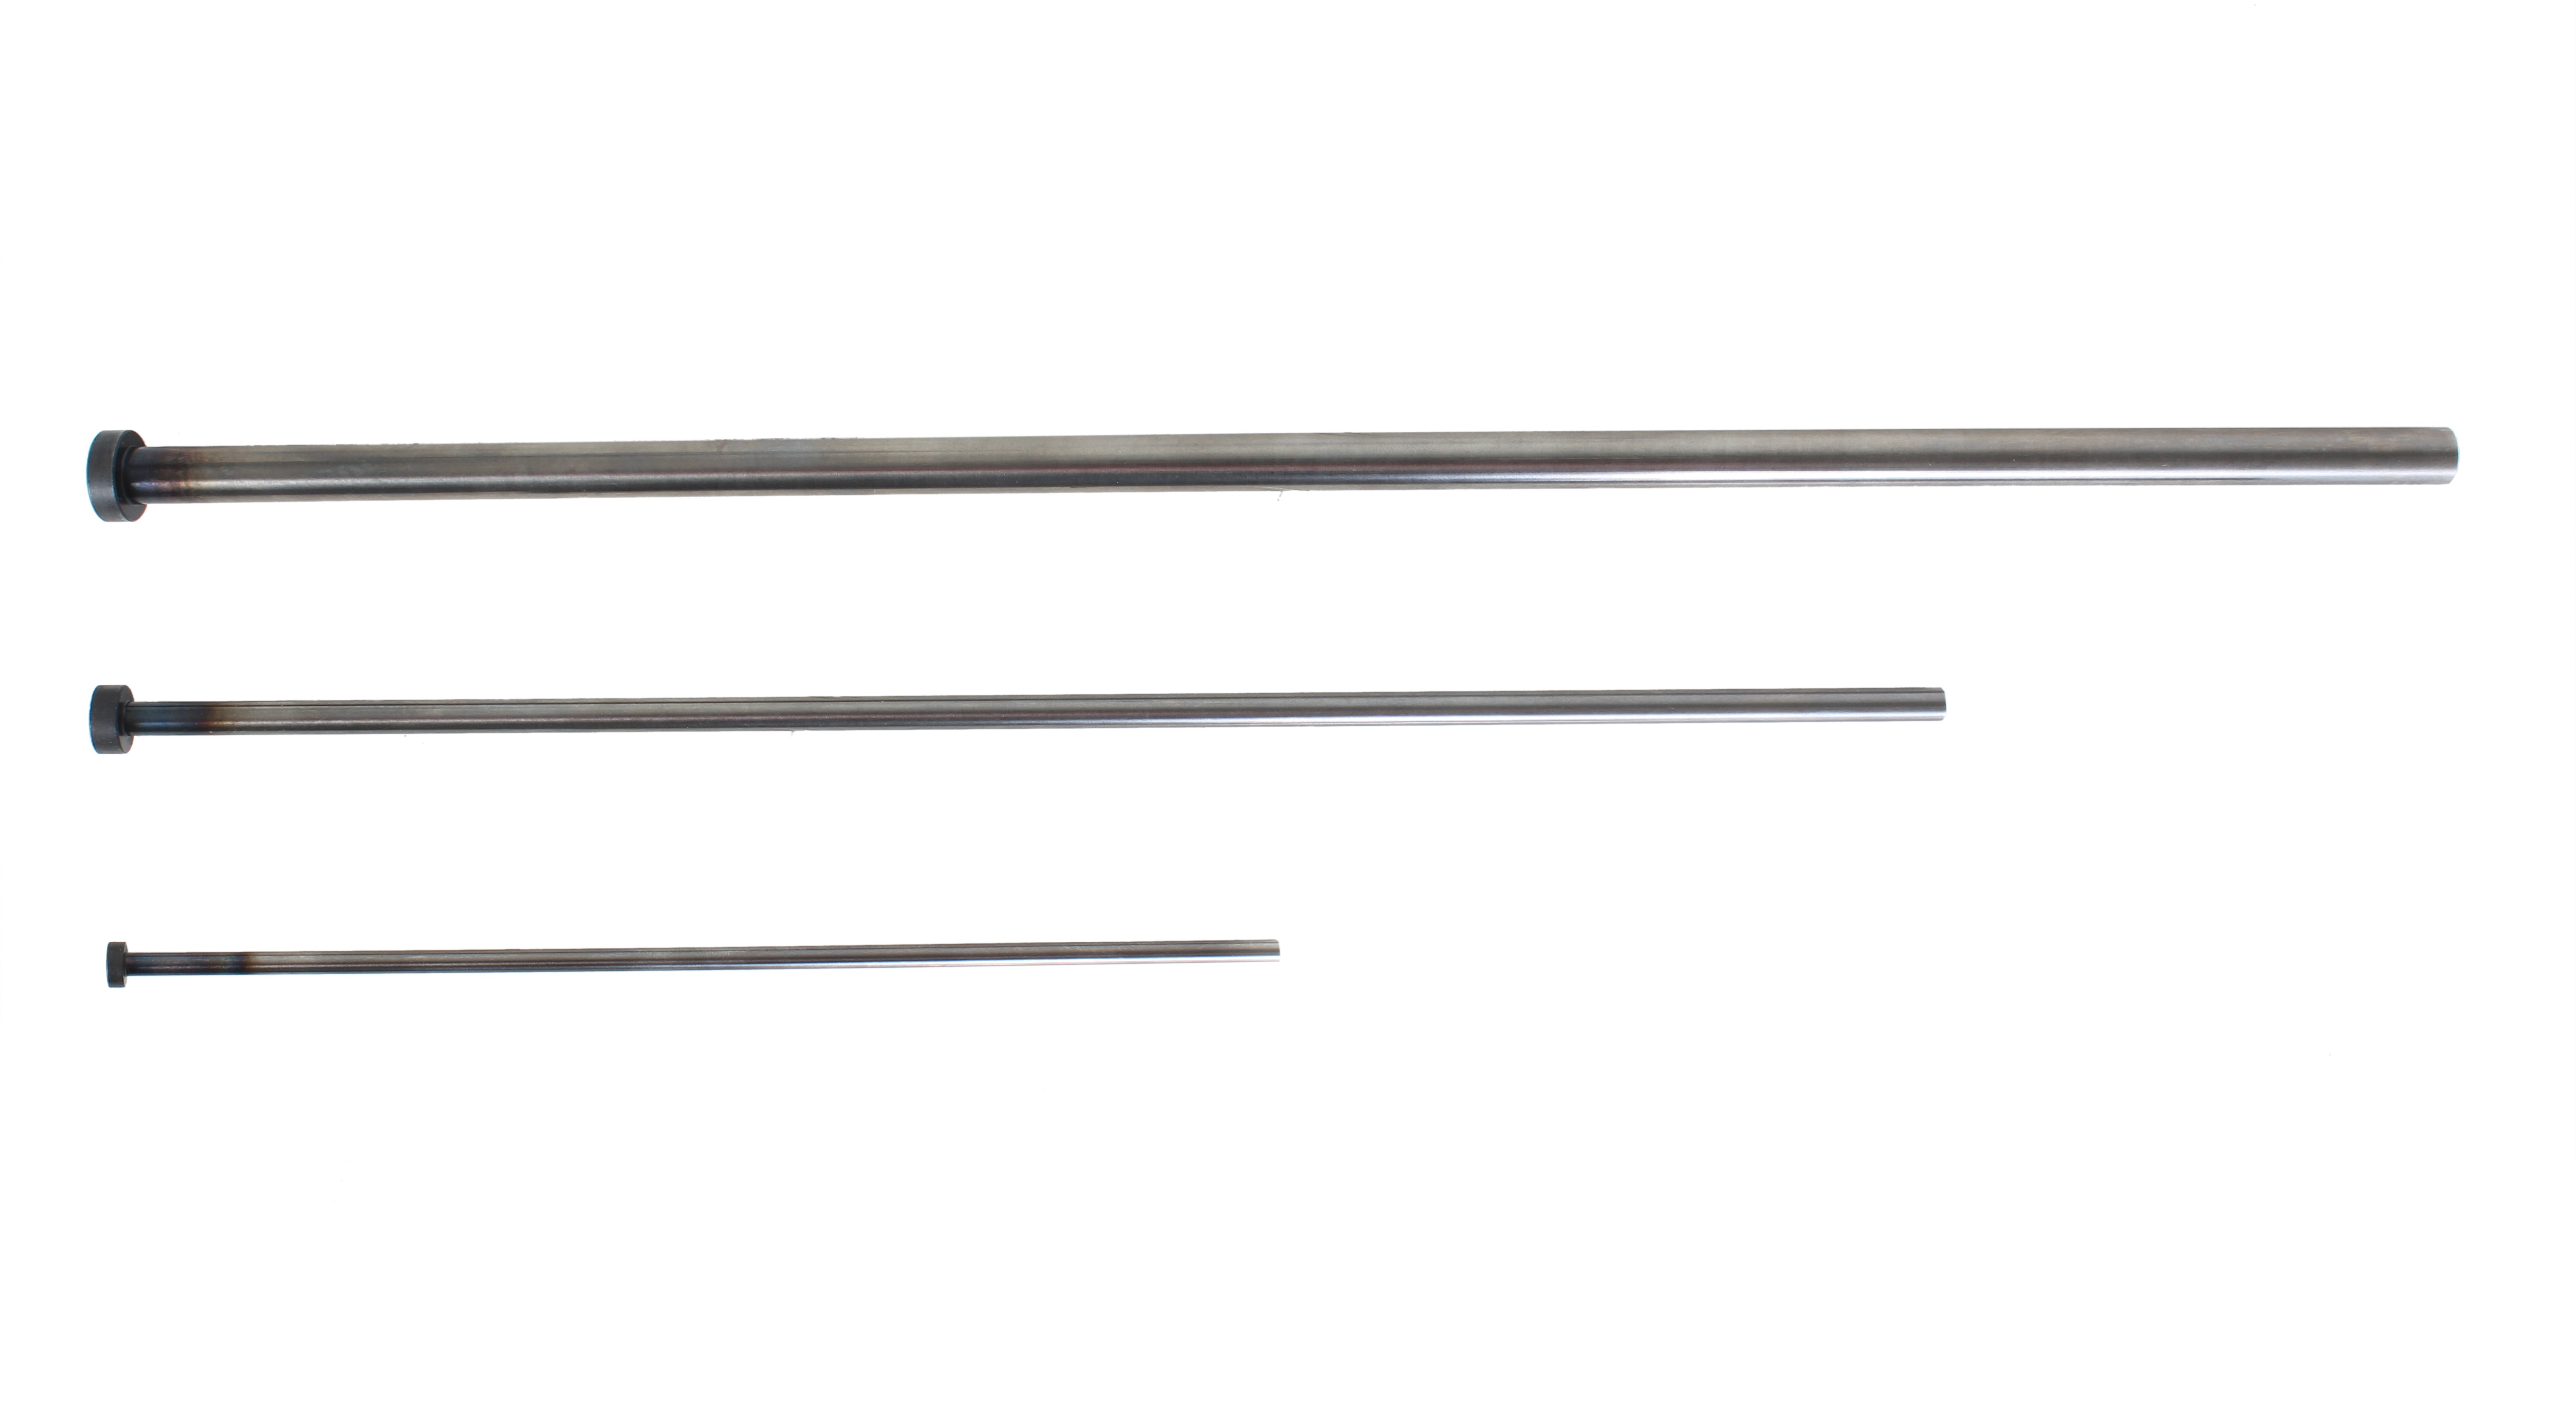 STRAIGHT EJECTOR PINS -DIN Type/SKD61 equivalent+Nitrided/Standard- (D-EPN20-125) 